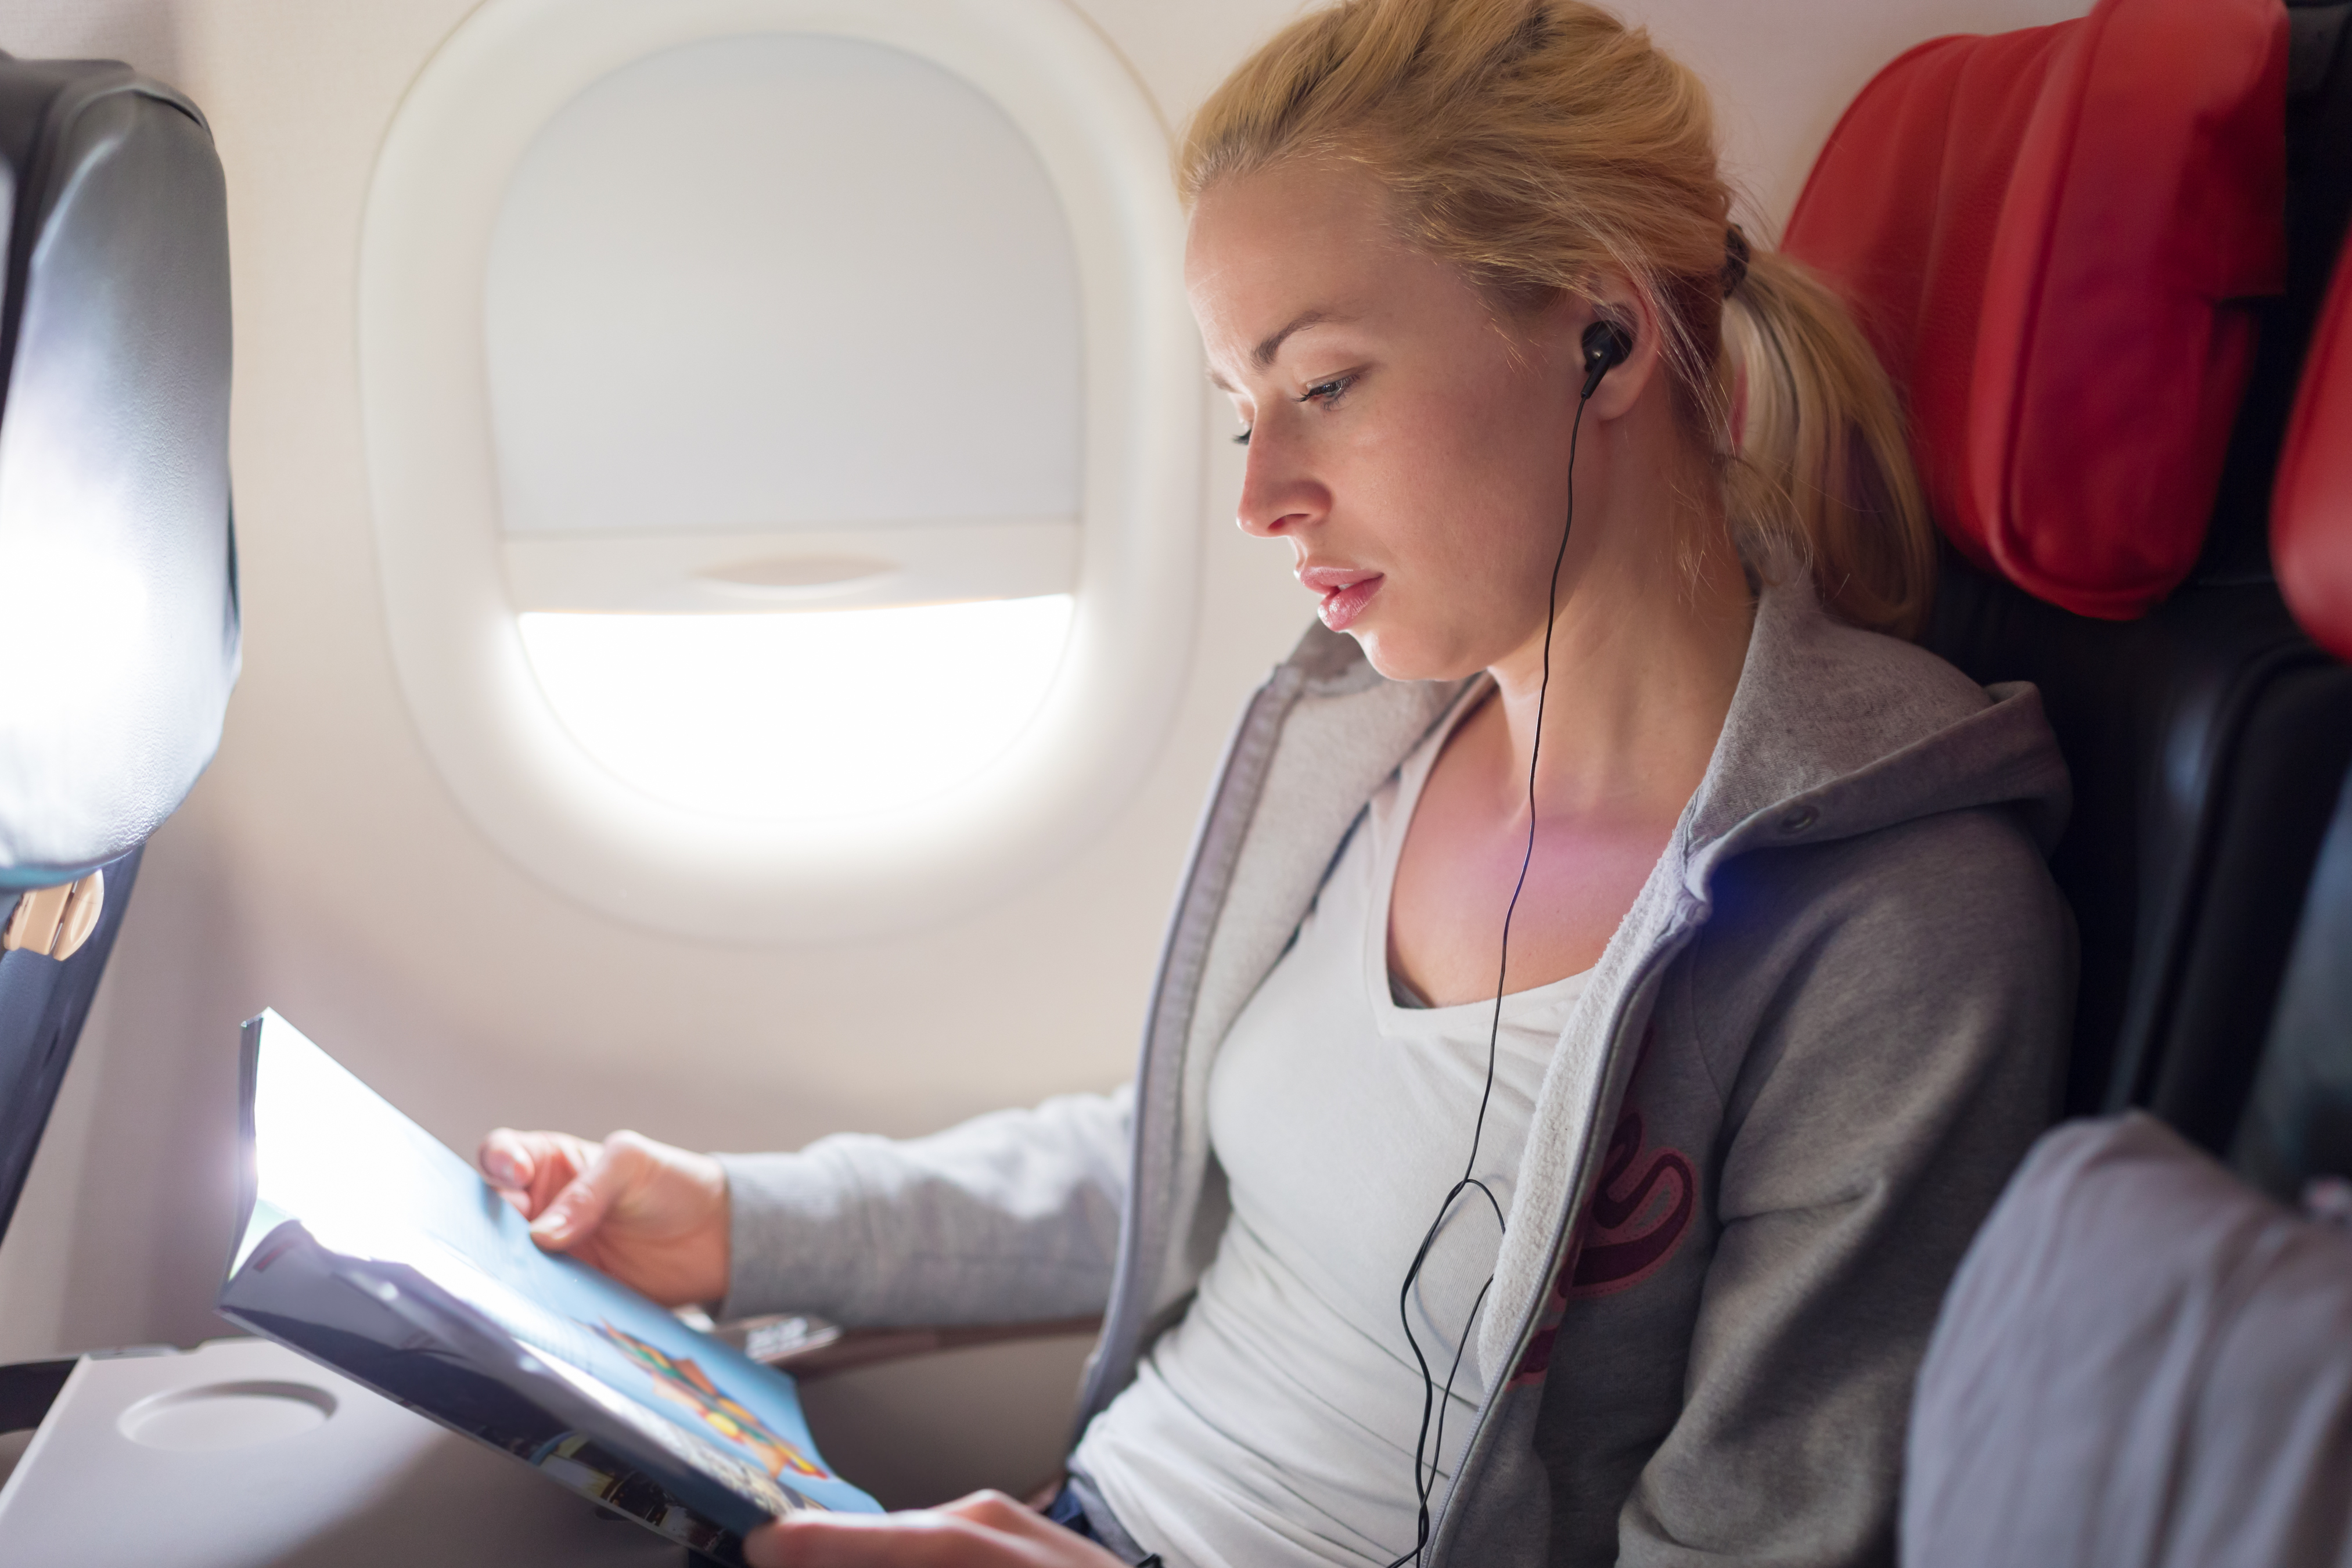 A woman sitting in a window seat of an airplane | Source: Shutterstock